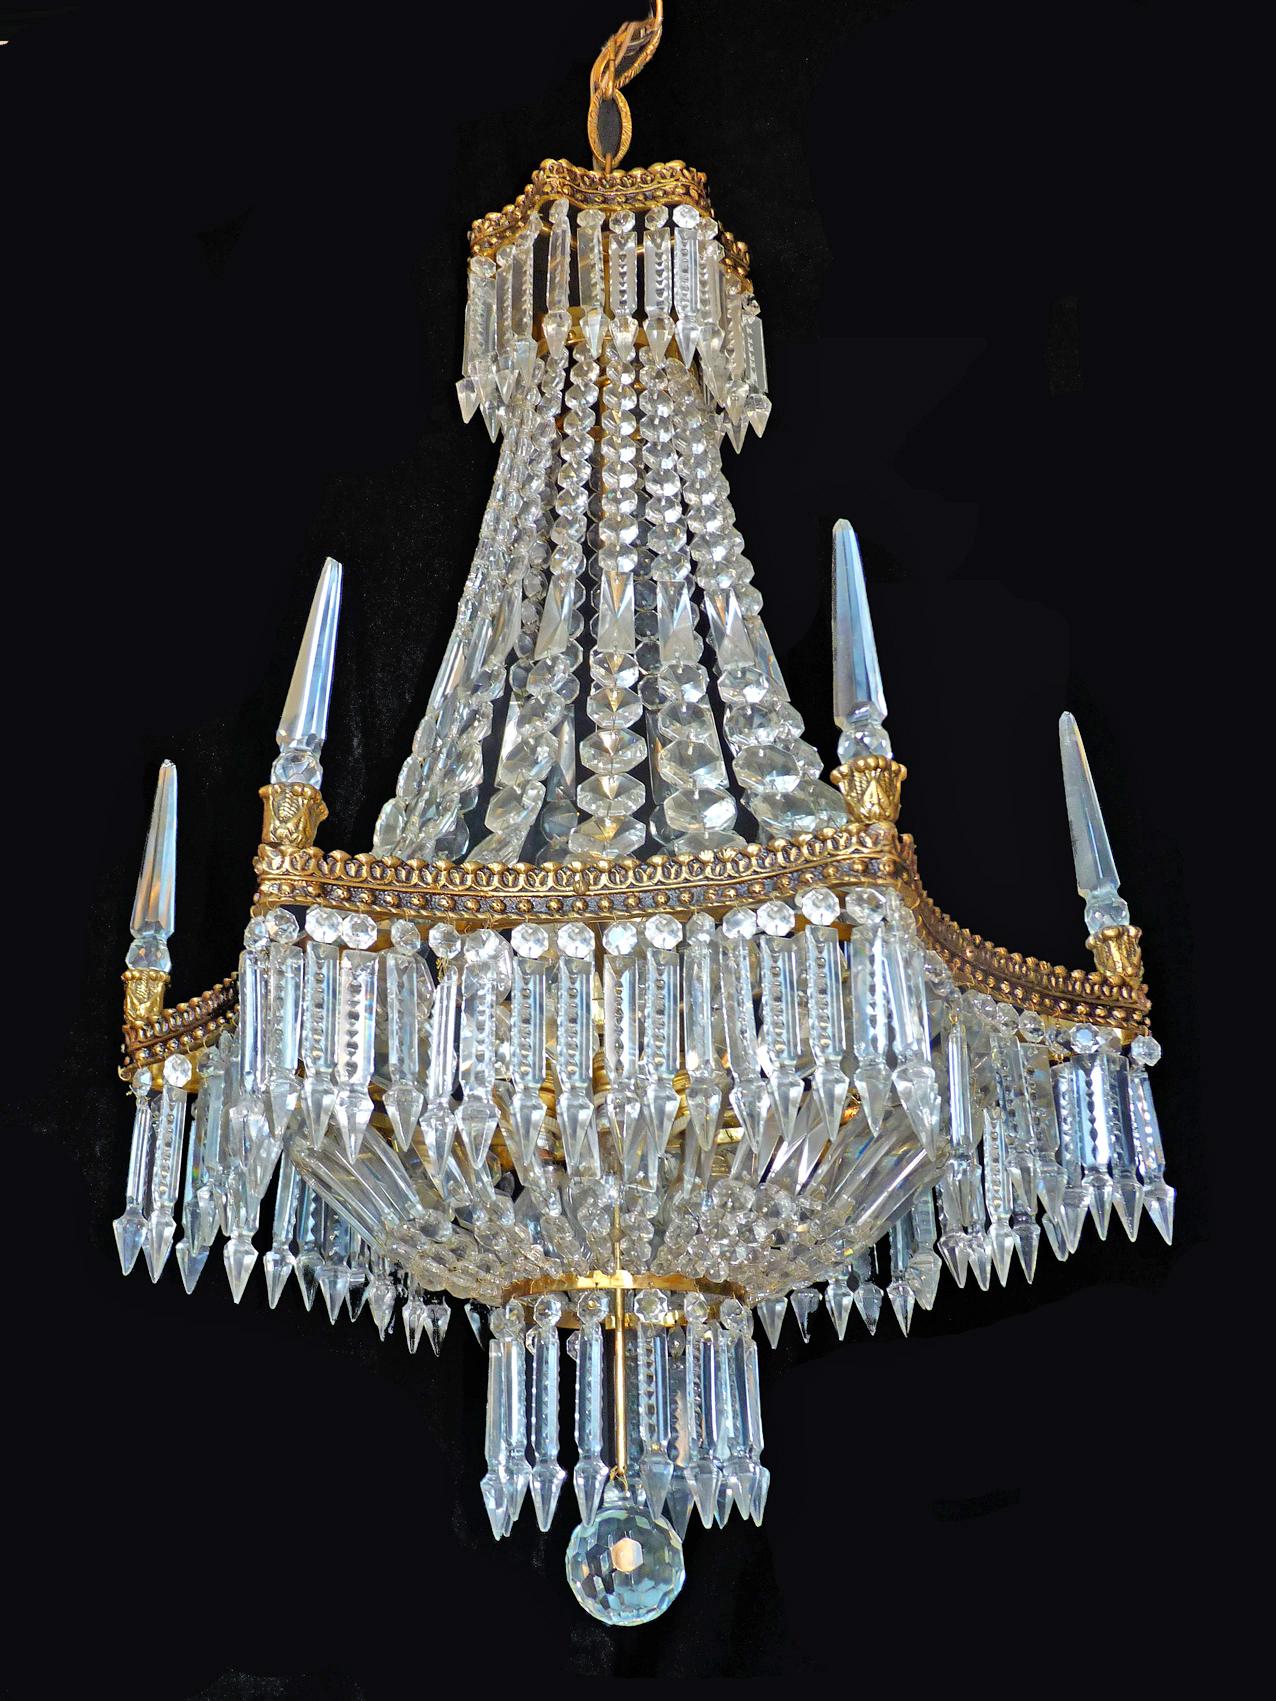 Six-light French Empire pure crystal basket chandelier with a clean hexagonal gilt bronze frame and 6-faceted crystal obelisks
Measures:
Diameter 22 in/ 53 cm
Height 55.2 in 31.5 in + 23.6 in/chain (140 cm-80 cm and 60 cm/ chain)
Weight: 26 lb/ 12